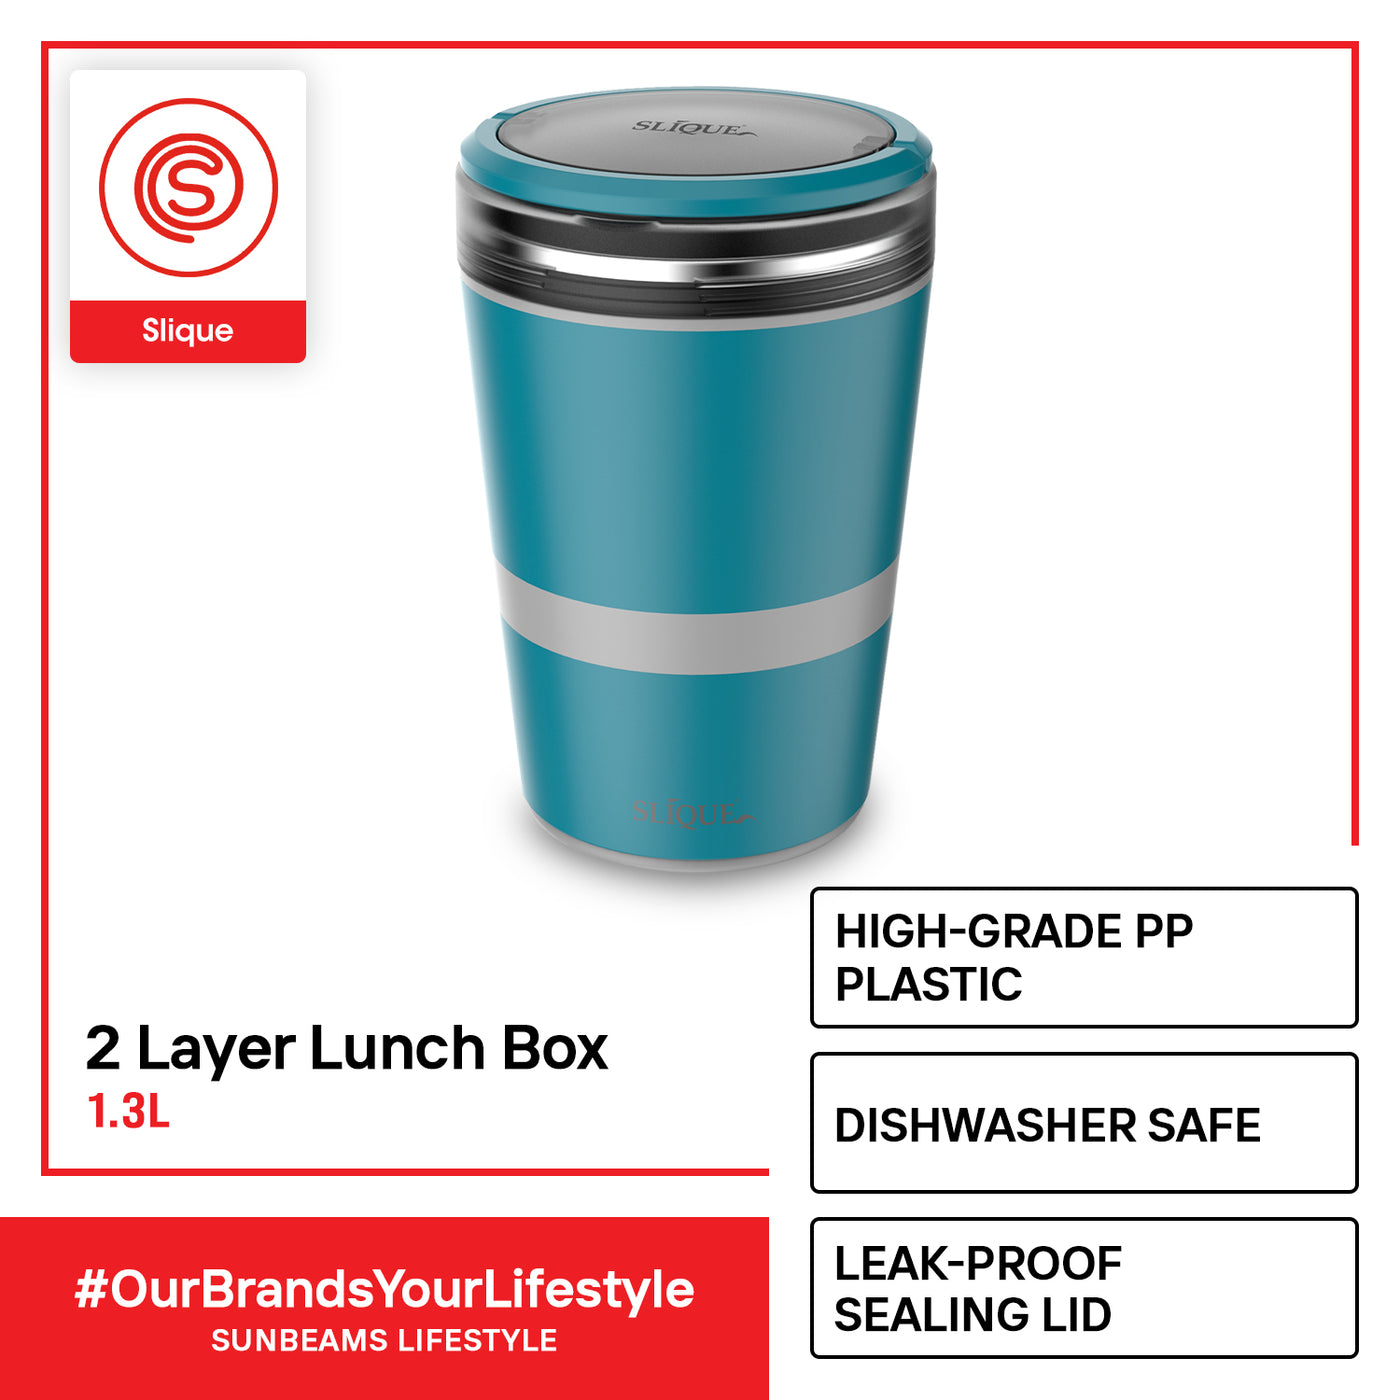 SLIQUE Premium 2 Layer Stainless Steel Insulated Lunch Box 1300ml BPA Free Amazing Gift Idea For Any Occasion! (Aqua Green)